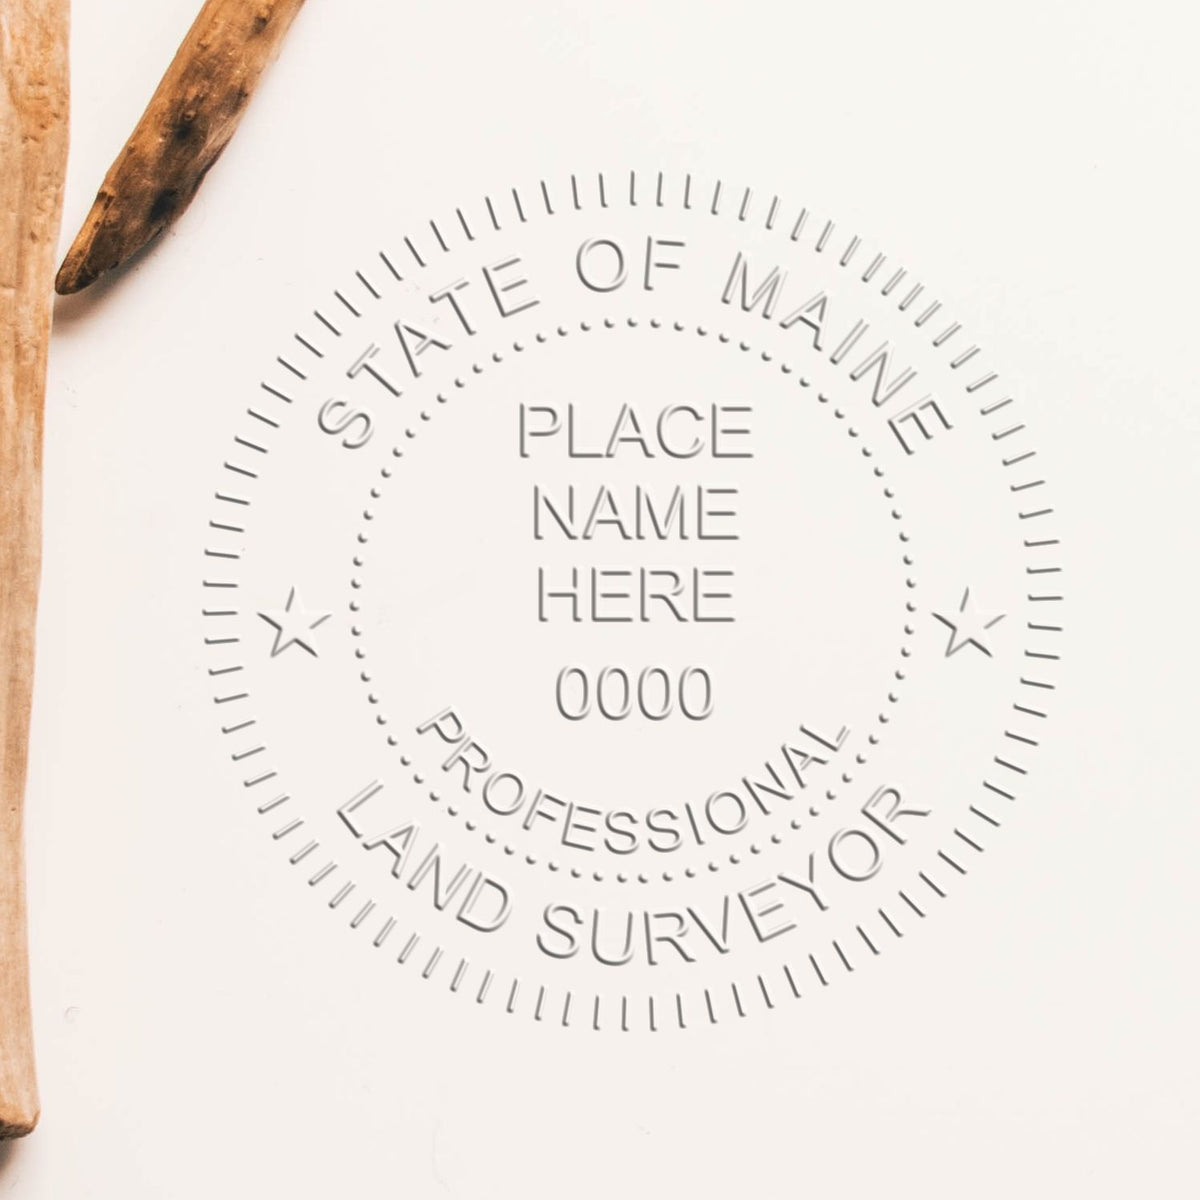 The Gift Maine Land Surveyor Seal stamp impression comes to life with a crisp, detailed image stamped on paper - showcasing true professional quality.